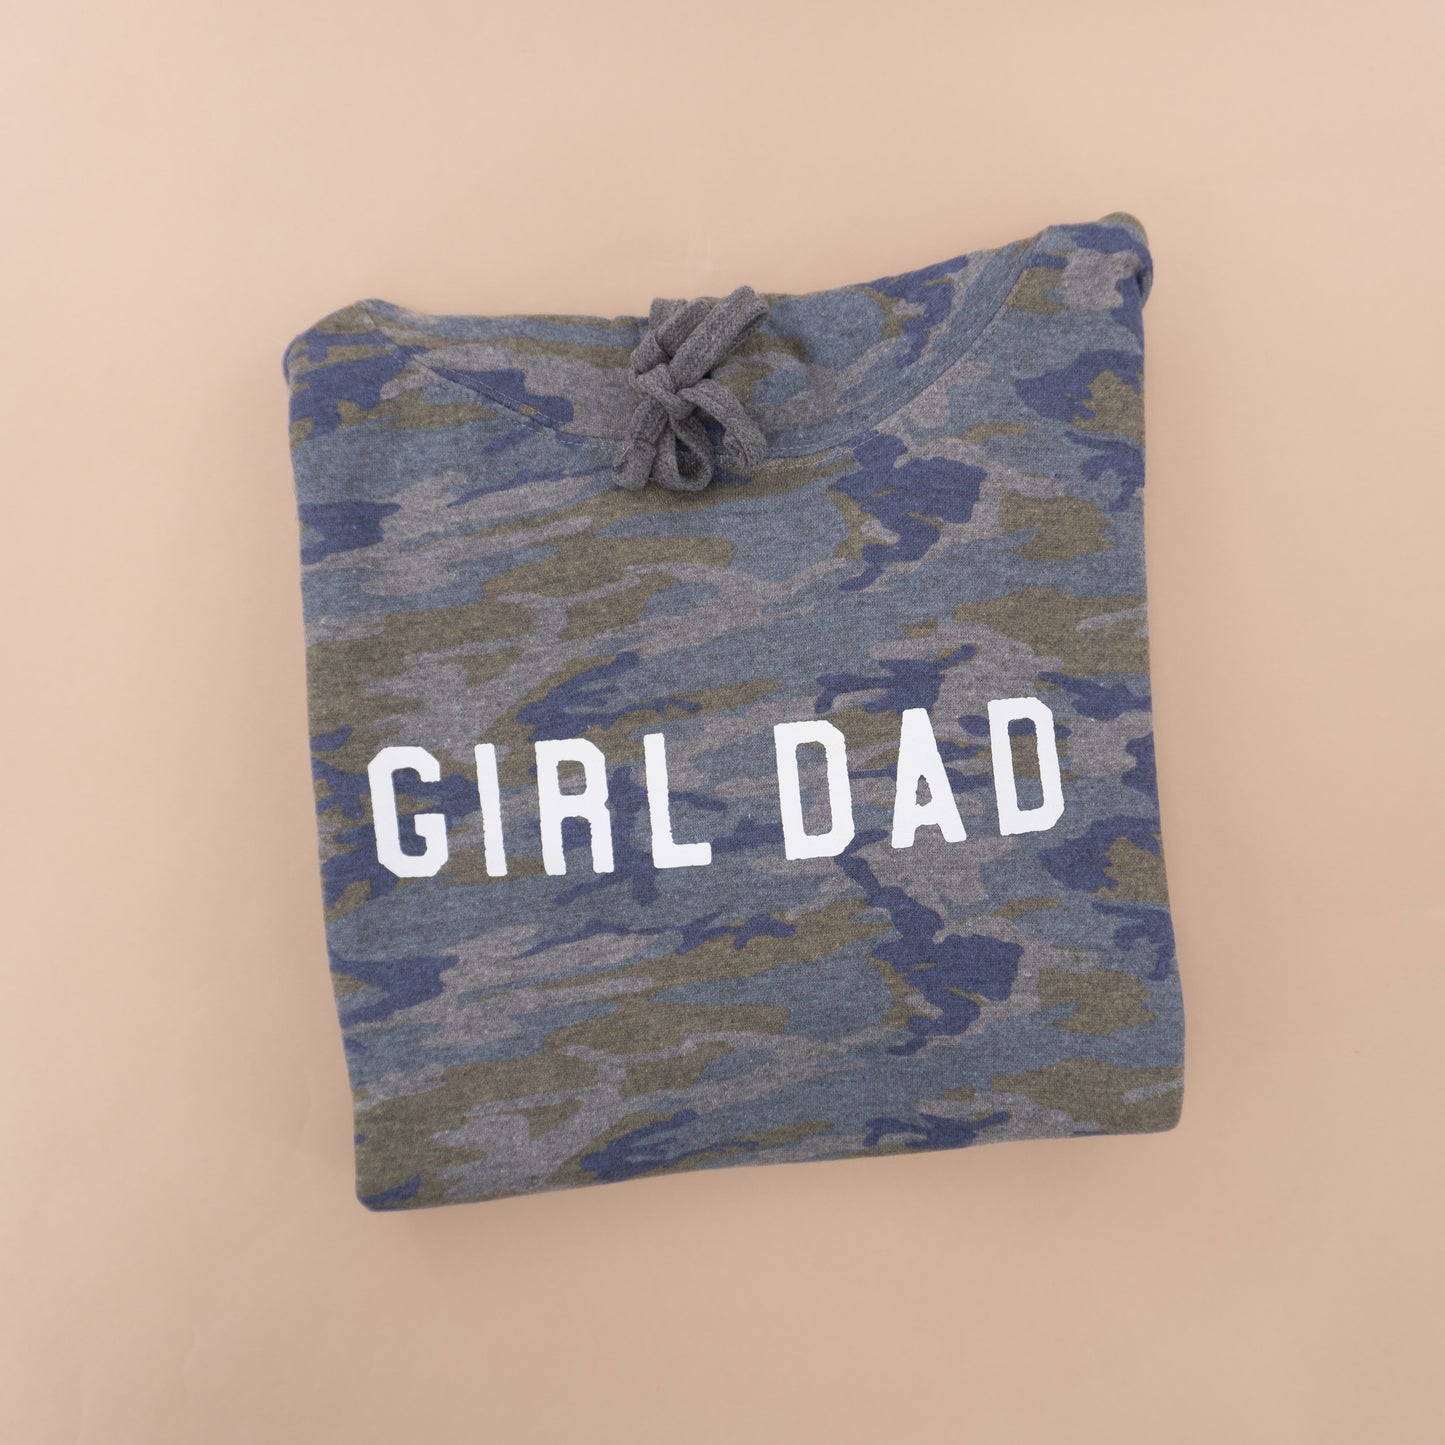 Girl Dad® (Across Front, White) - Hoodie (Vintage Camo)